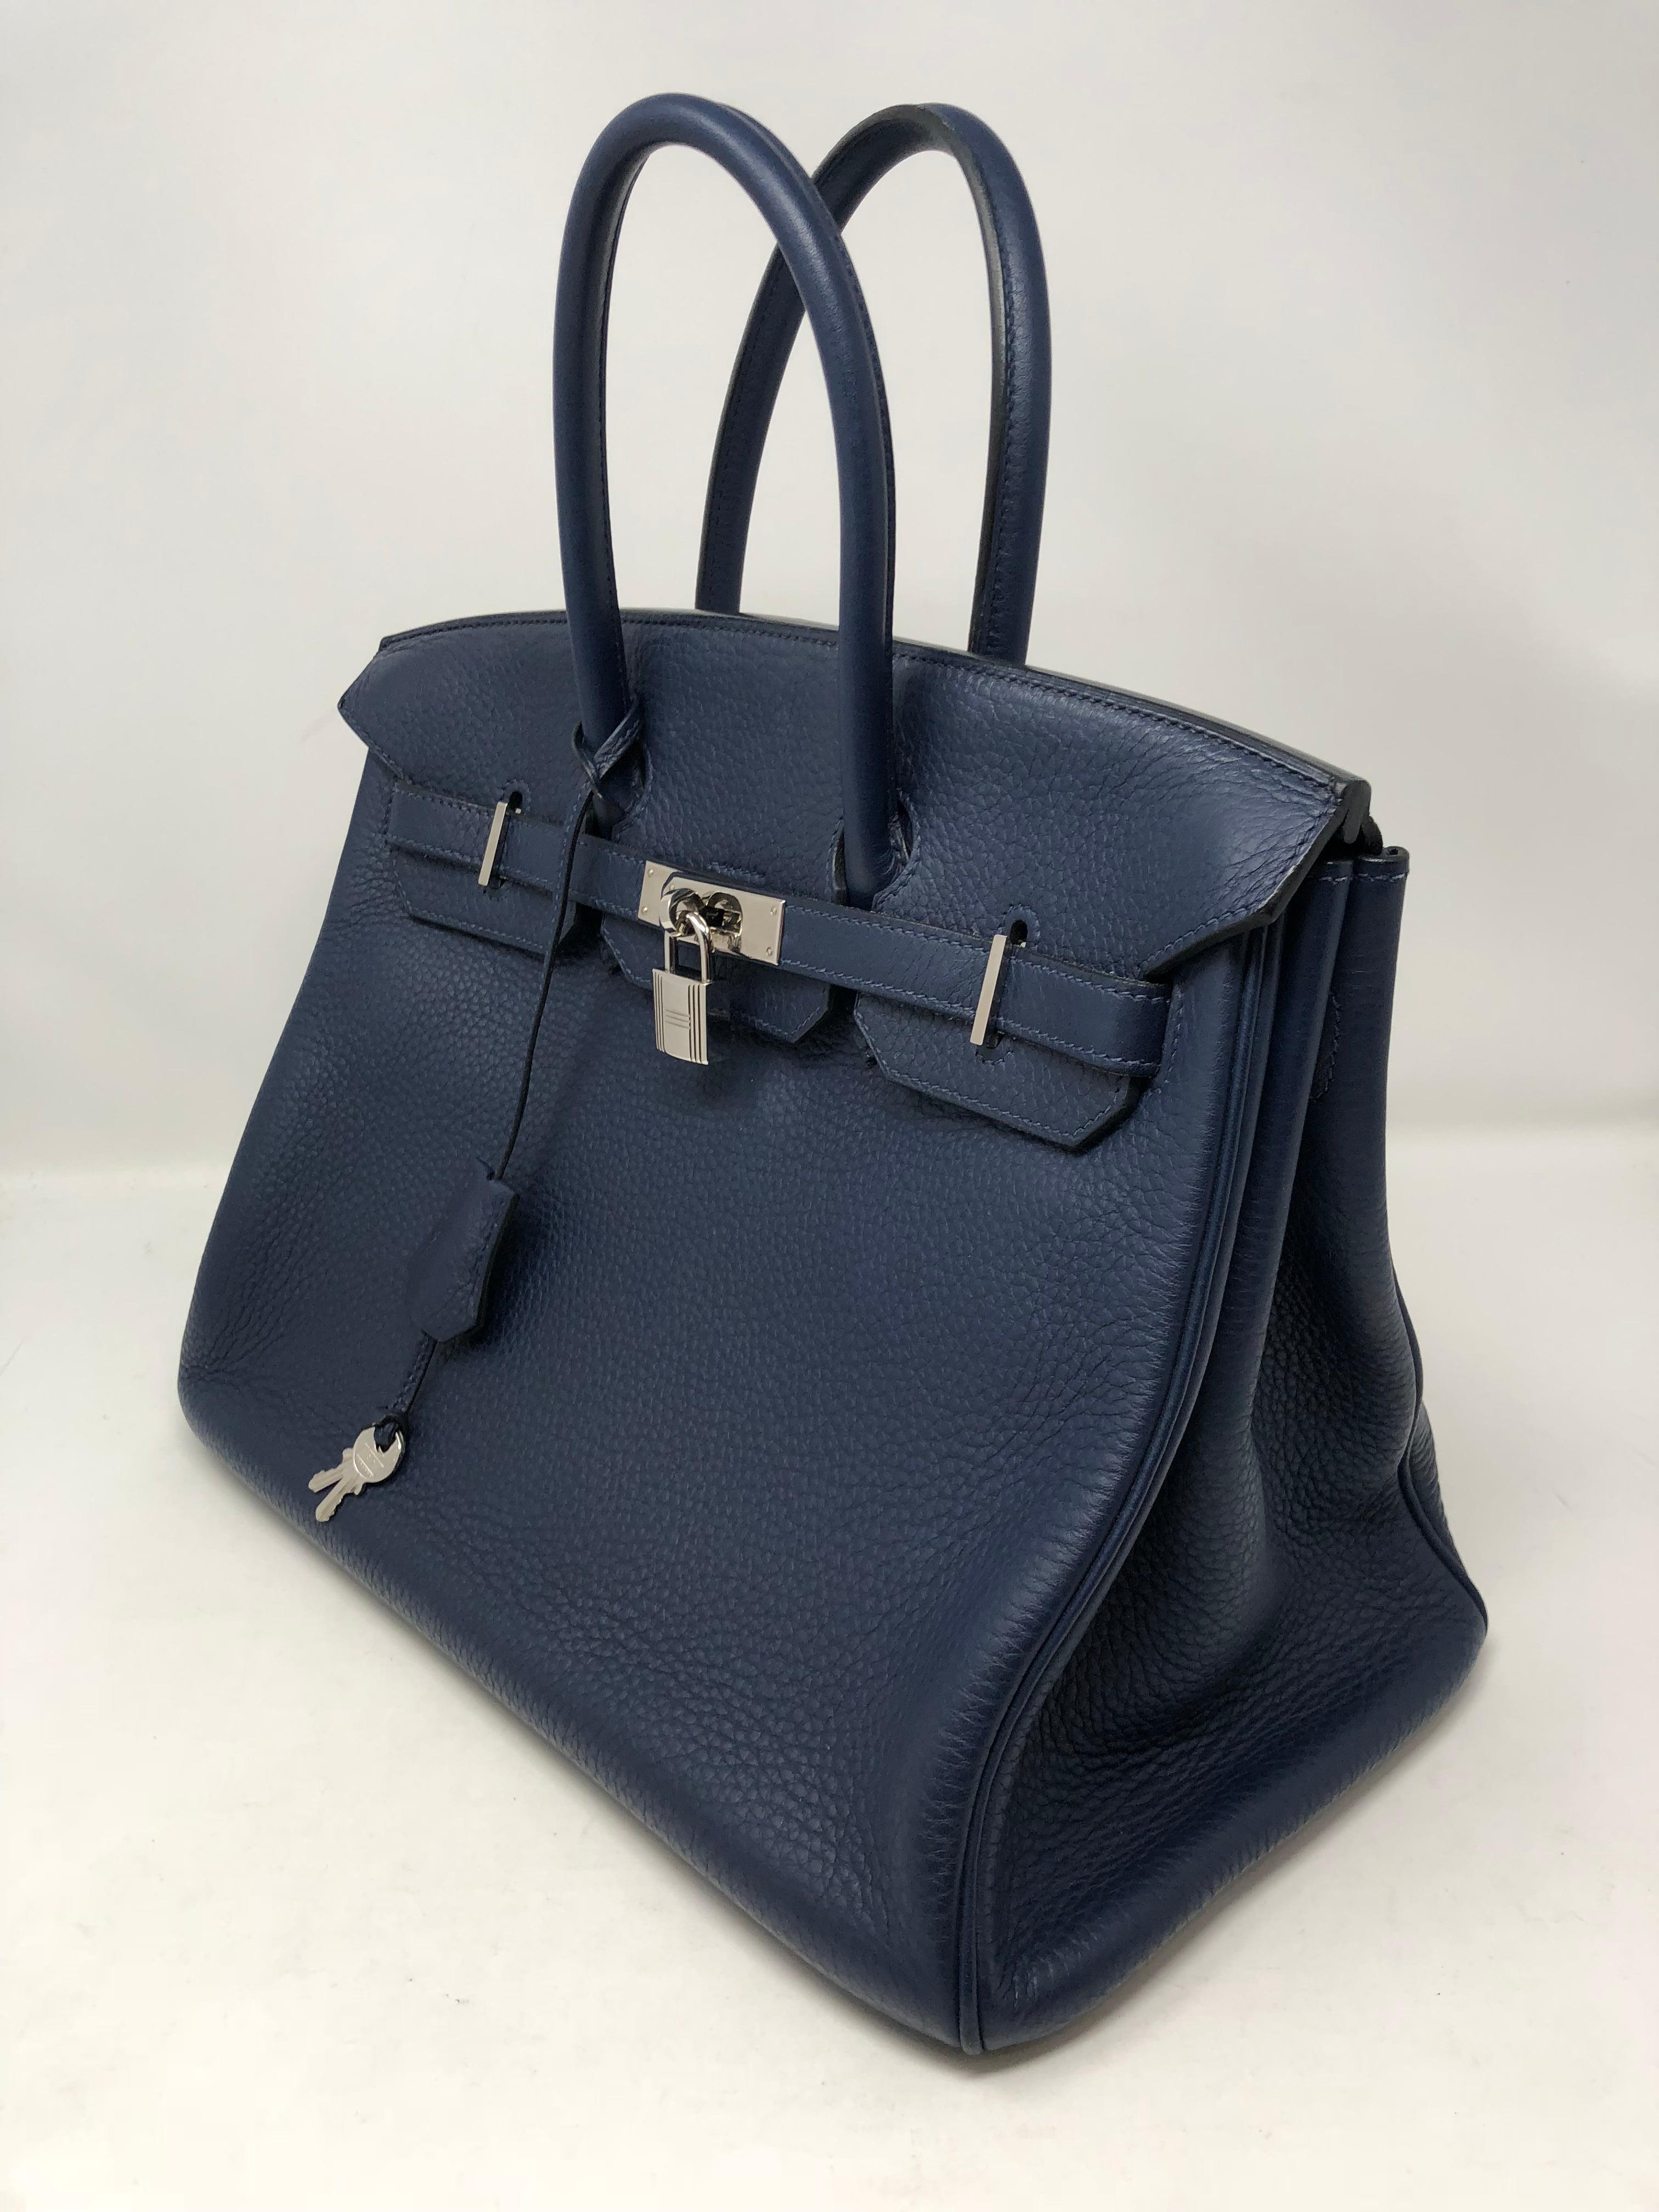 Hermes Birkin 35 Bleu Abysse with palladium hardware. This beautiful sapphire/ navy blue is more stunning in person. Mint condition with plastic still on front hardware. The Birkin is Clemence leather which holds up very well. Highly coveted color